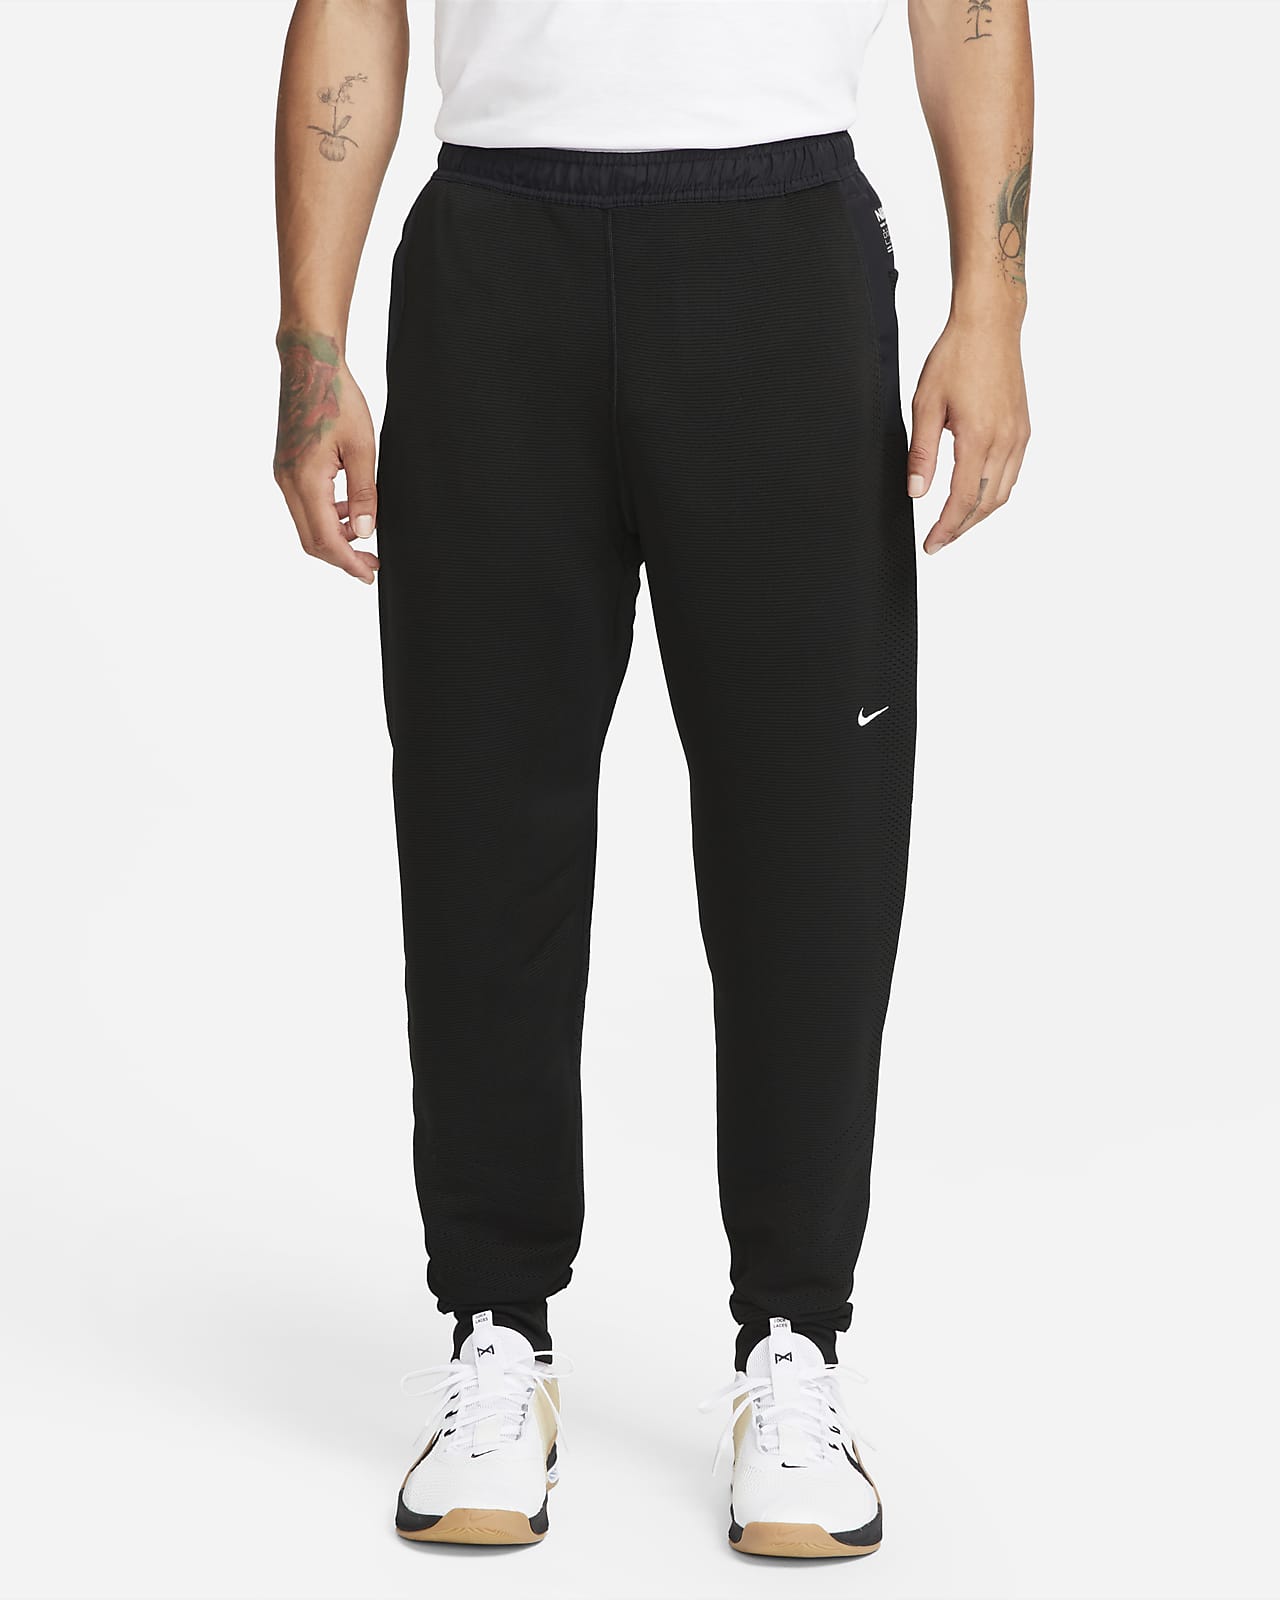 Vintage Nike Sweatpants XL Black Storm Fit Sportswear HIGH QUALITY! -  clothing & accessories - by owner - apparel sale